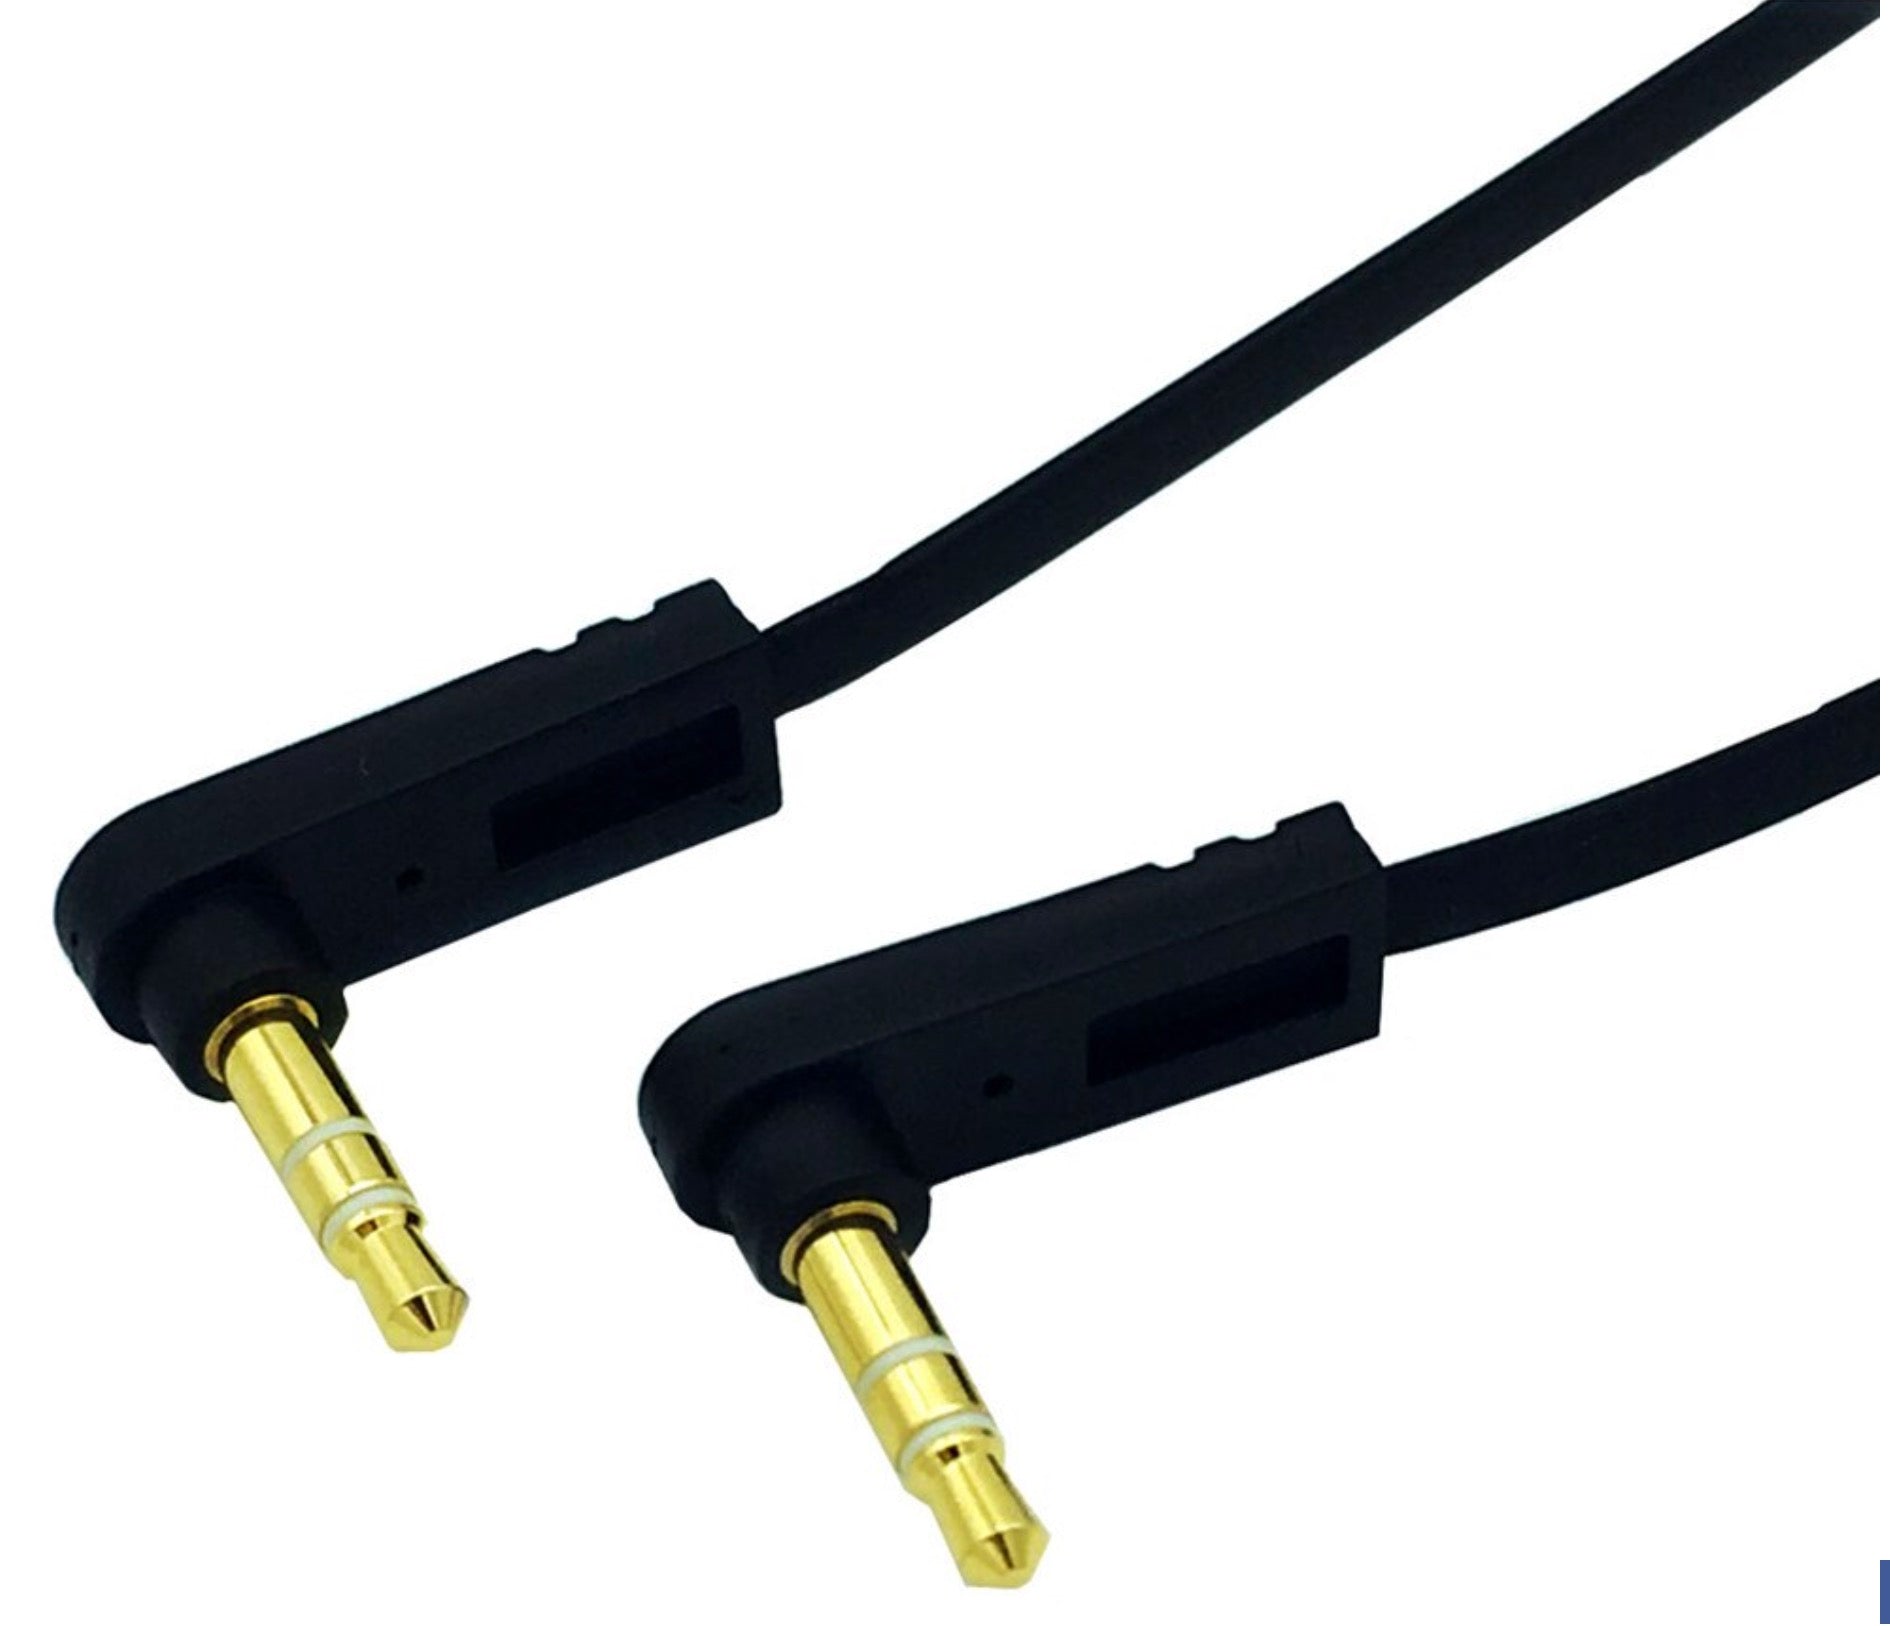 3.5mm 1/8" TRS Male to TRS Male Stereo Jack Audio Flat Cable